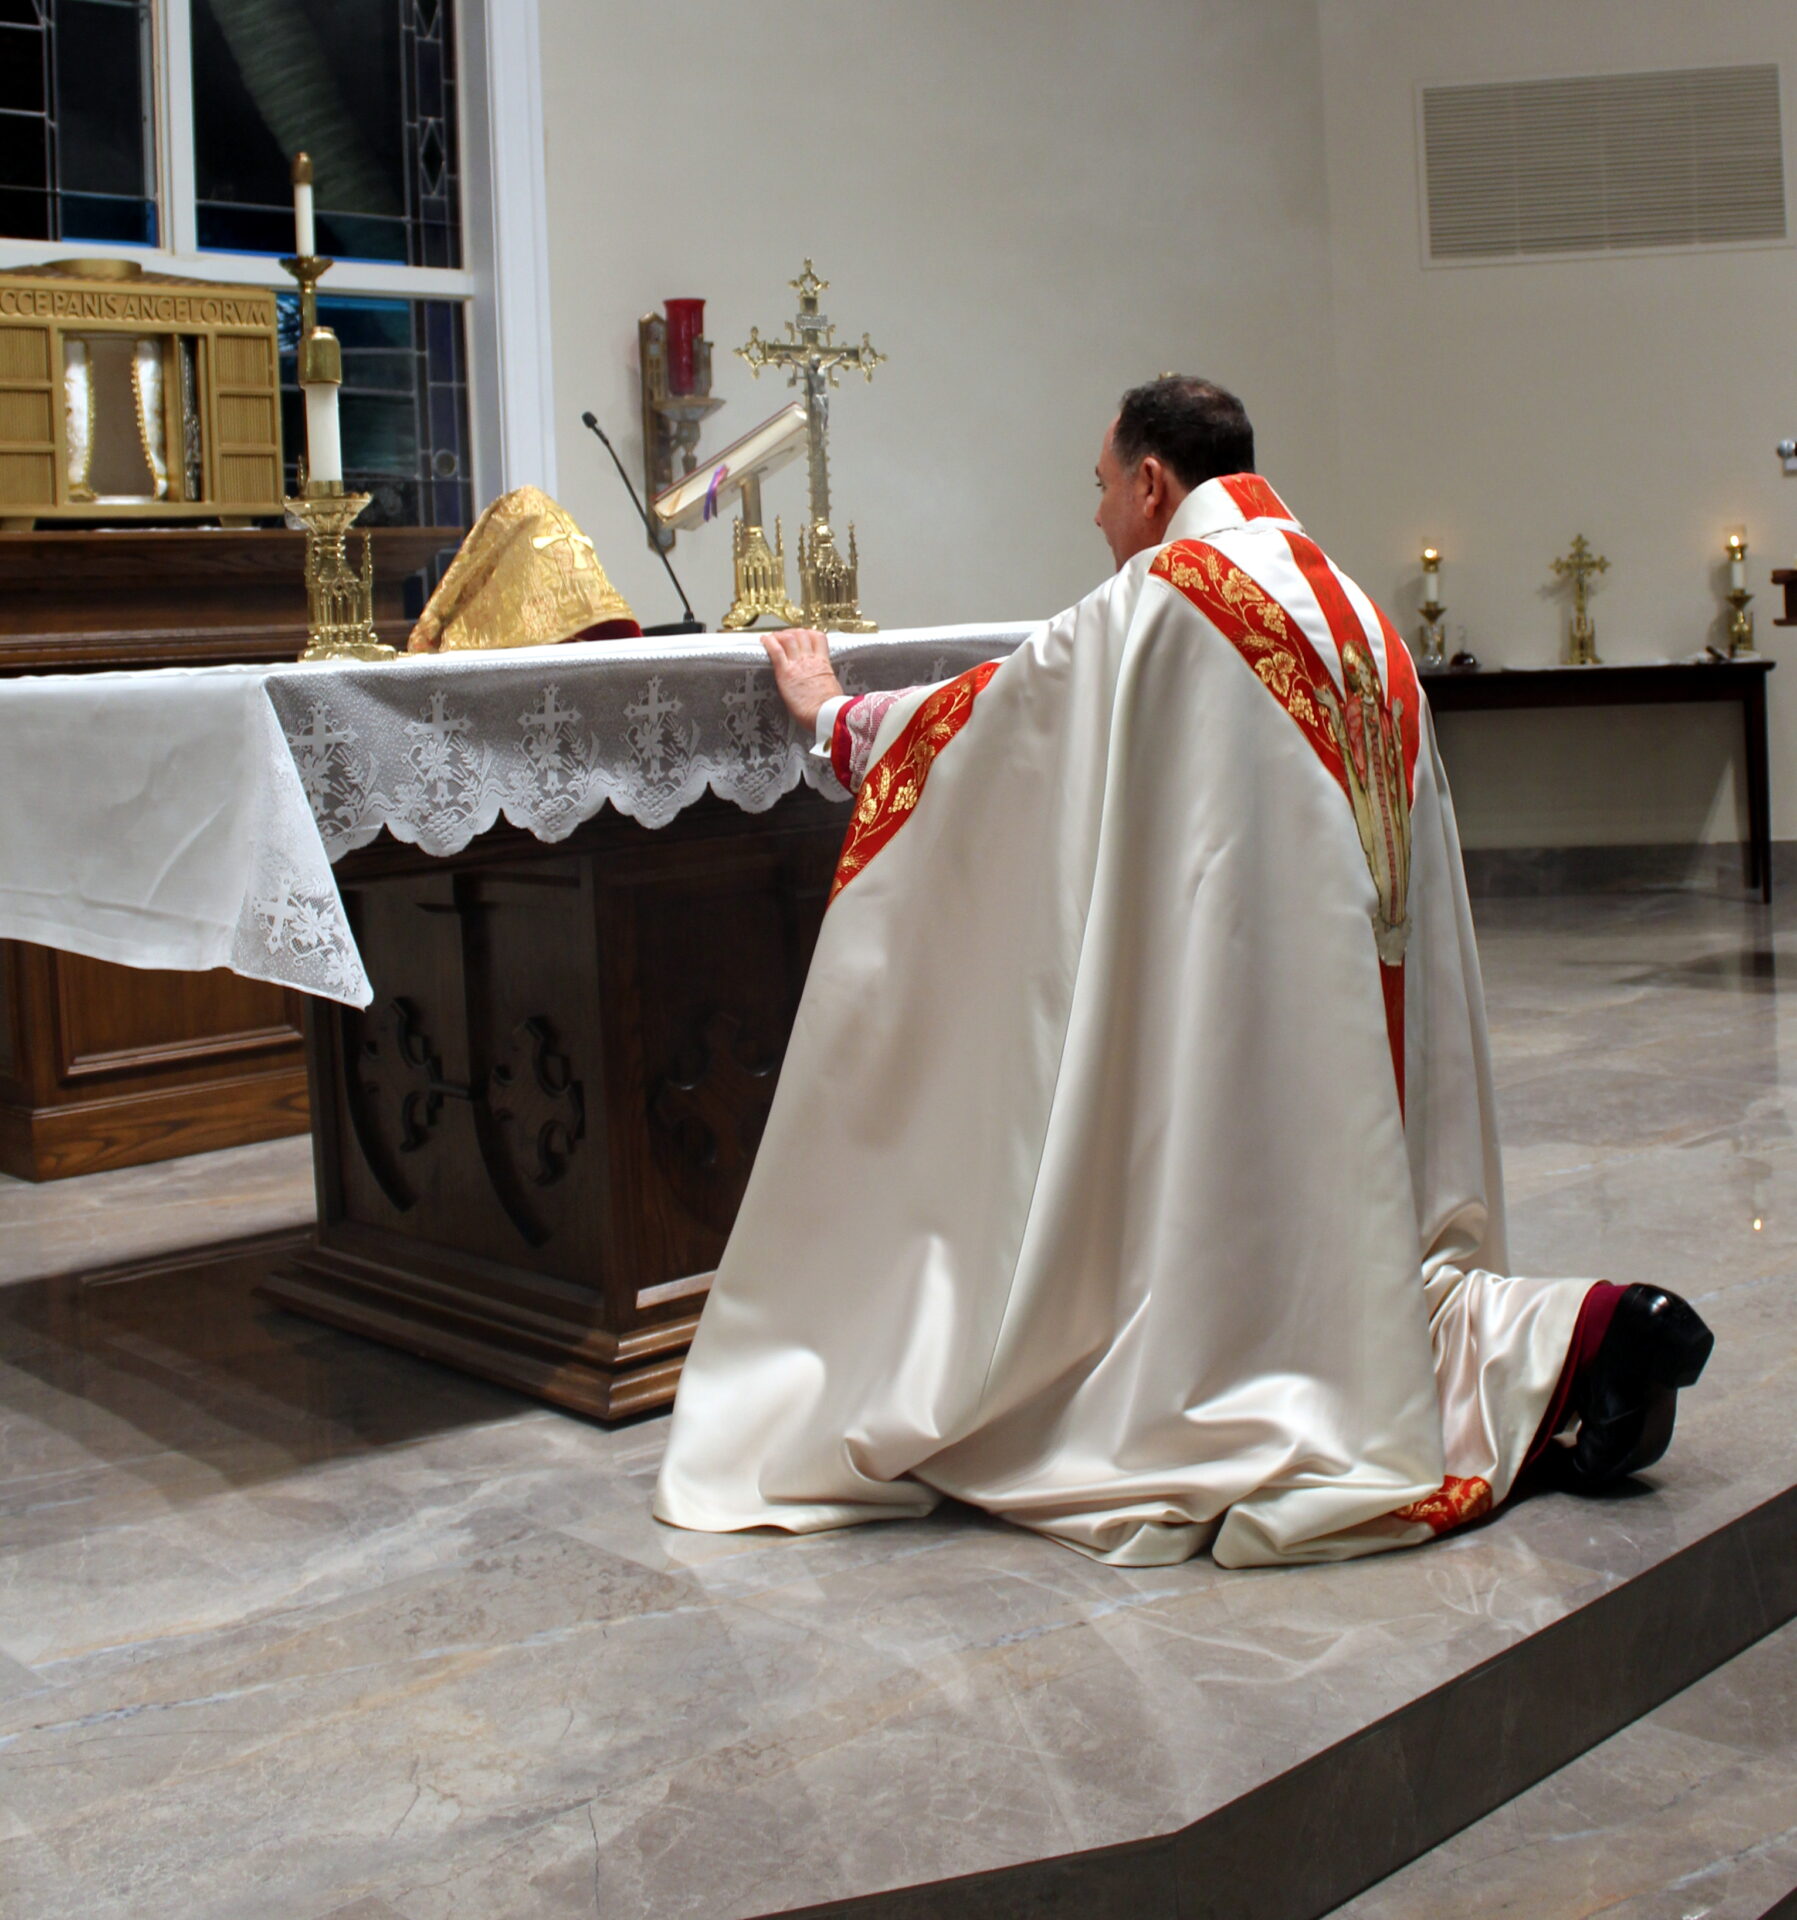 A priest kneeling down at the altar